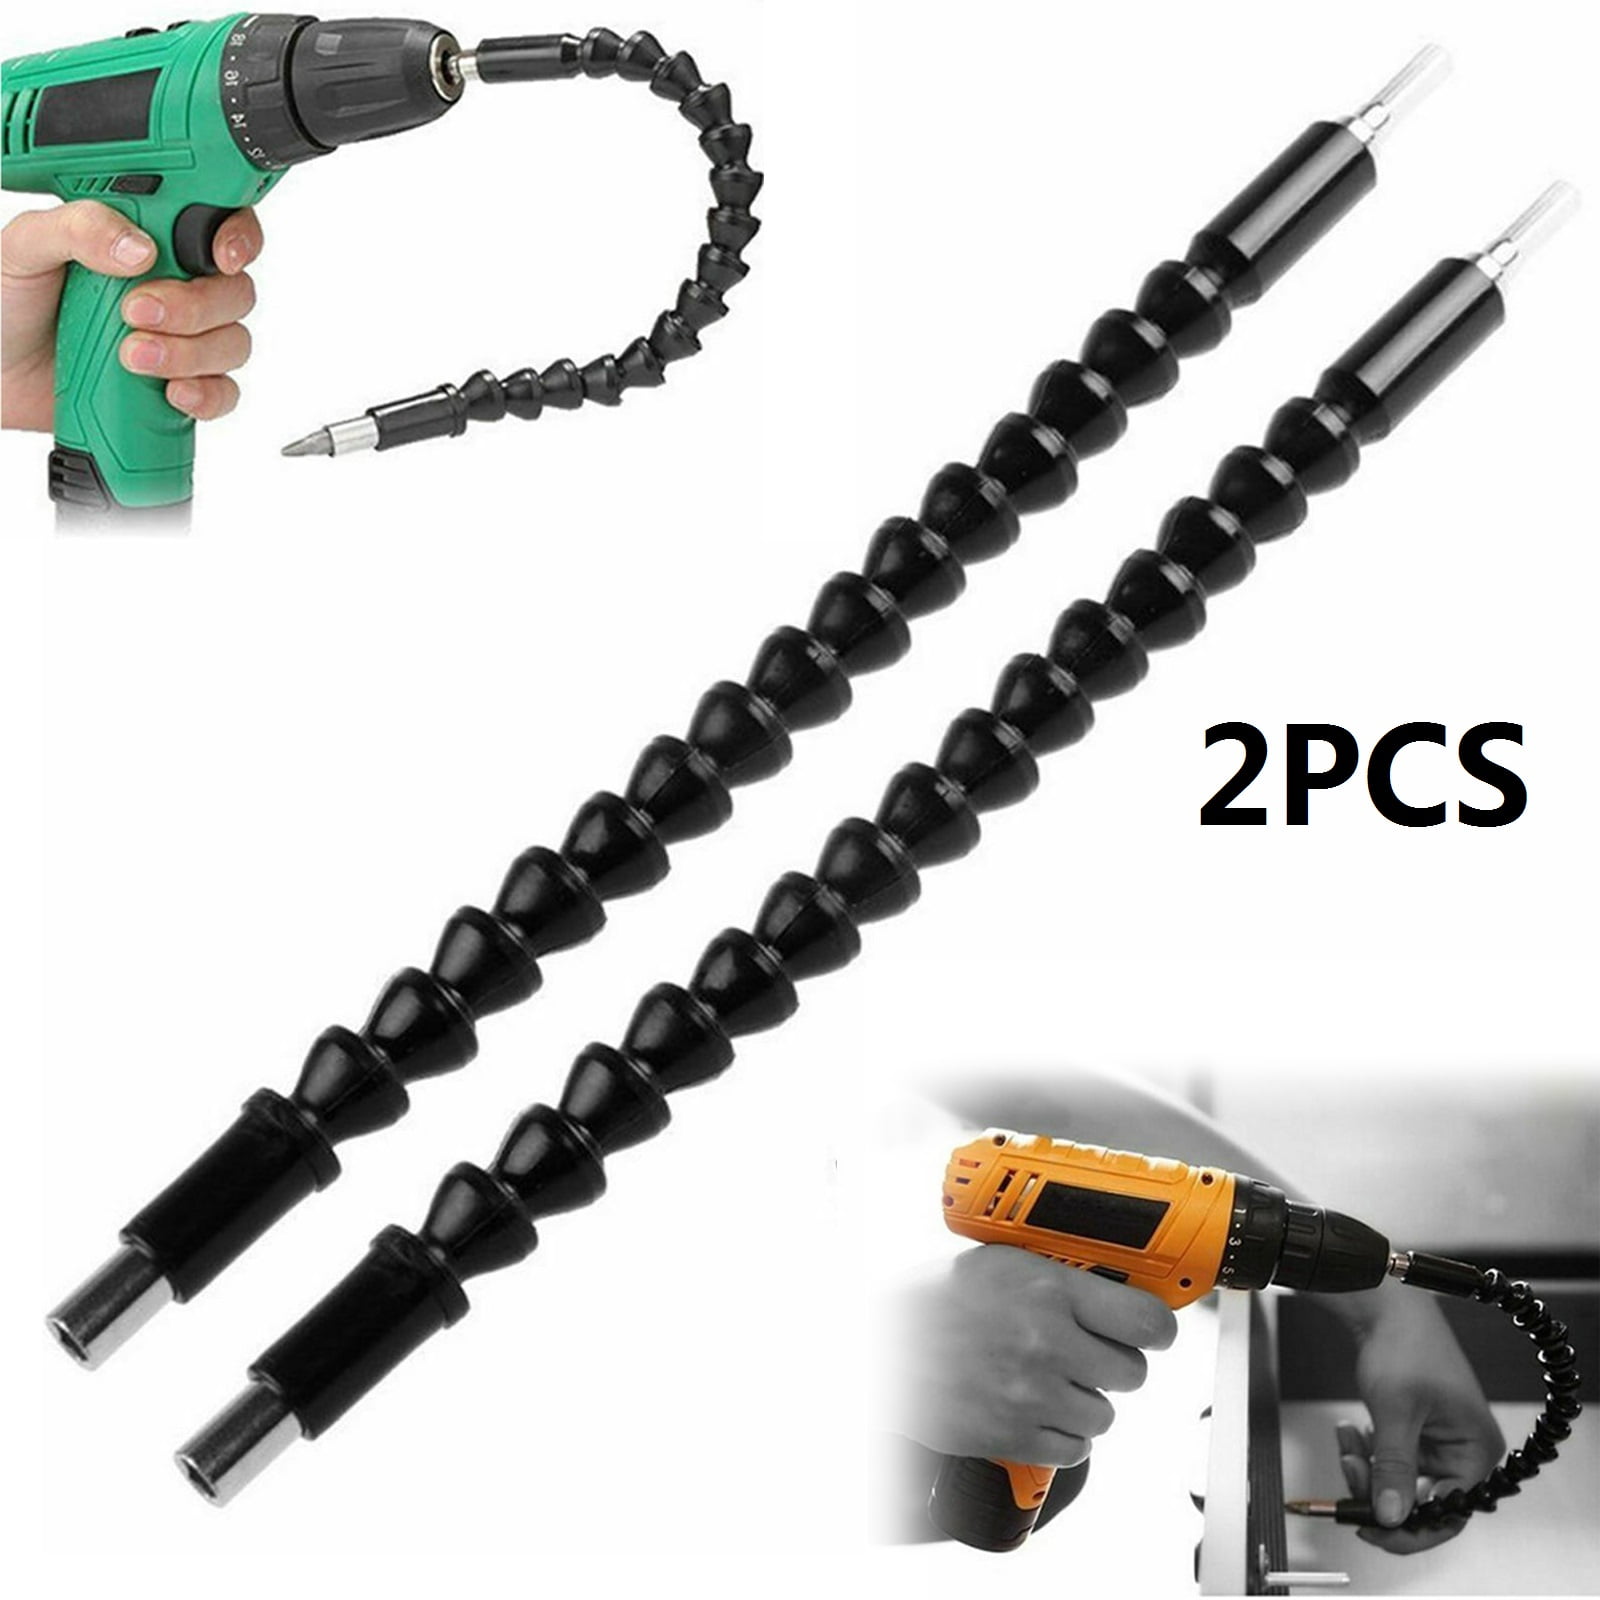 TSV 2pcs Flexible Drill Bit Extensions, Screwdriver Extension Soft Shafts  with 1/4 Hex Shank 